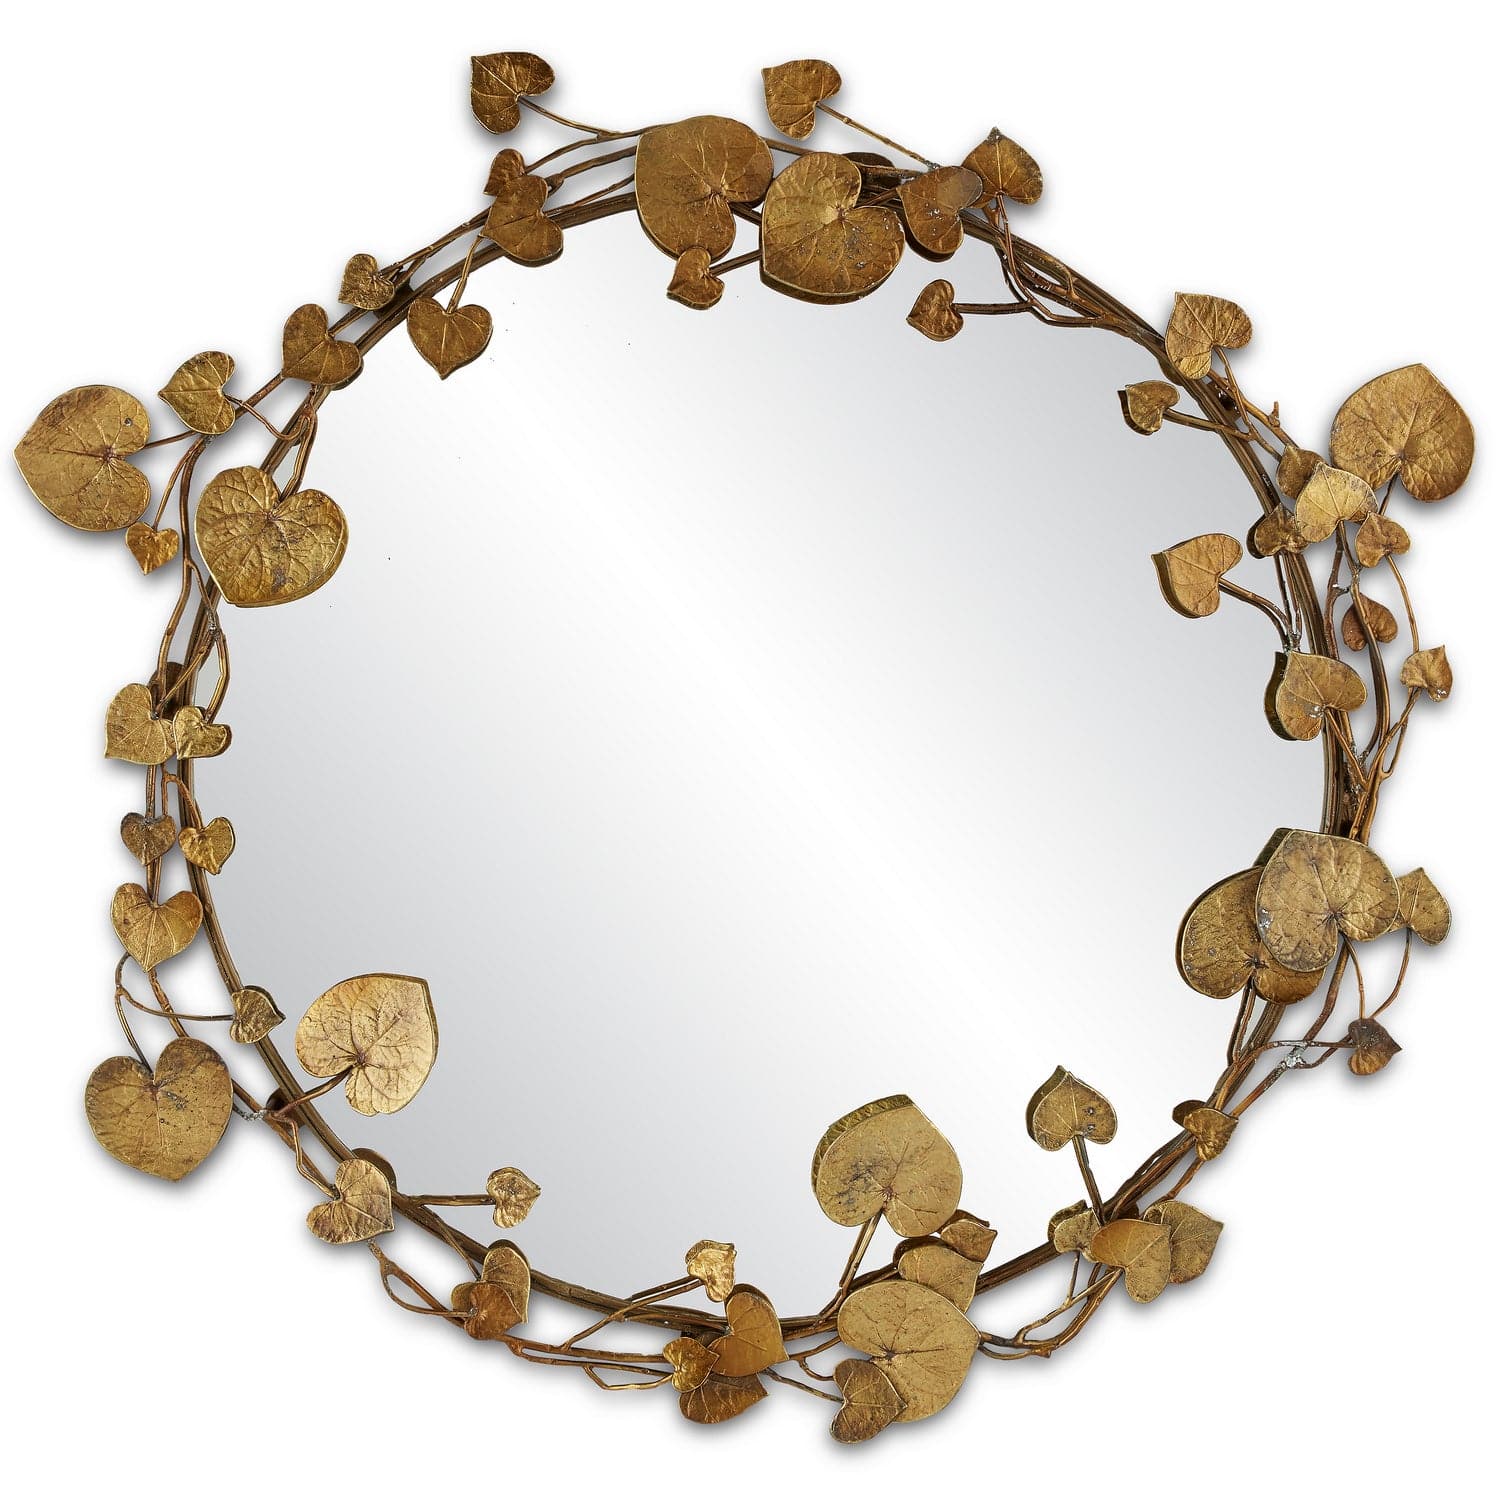 Mirror from the Vinna collection in Antique Brass/Mirror finish